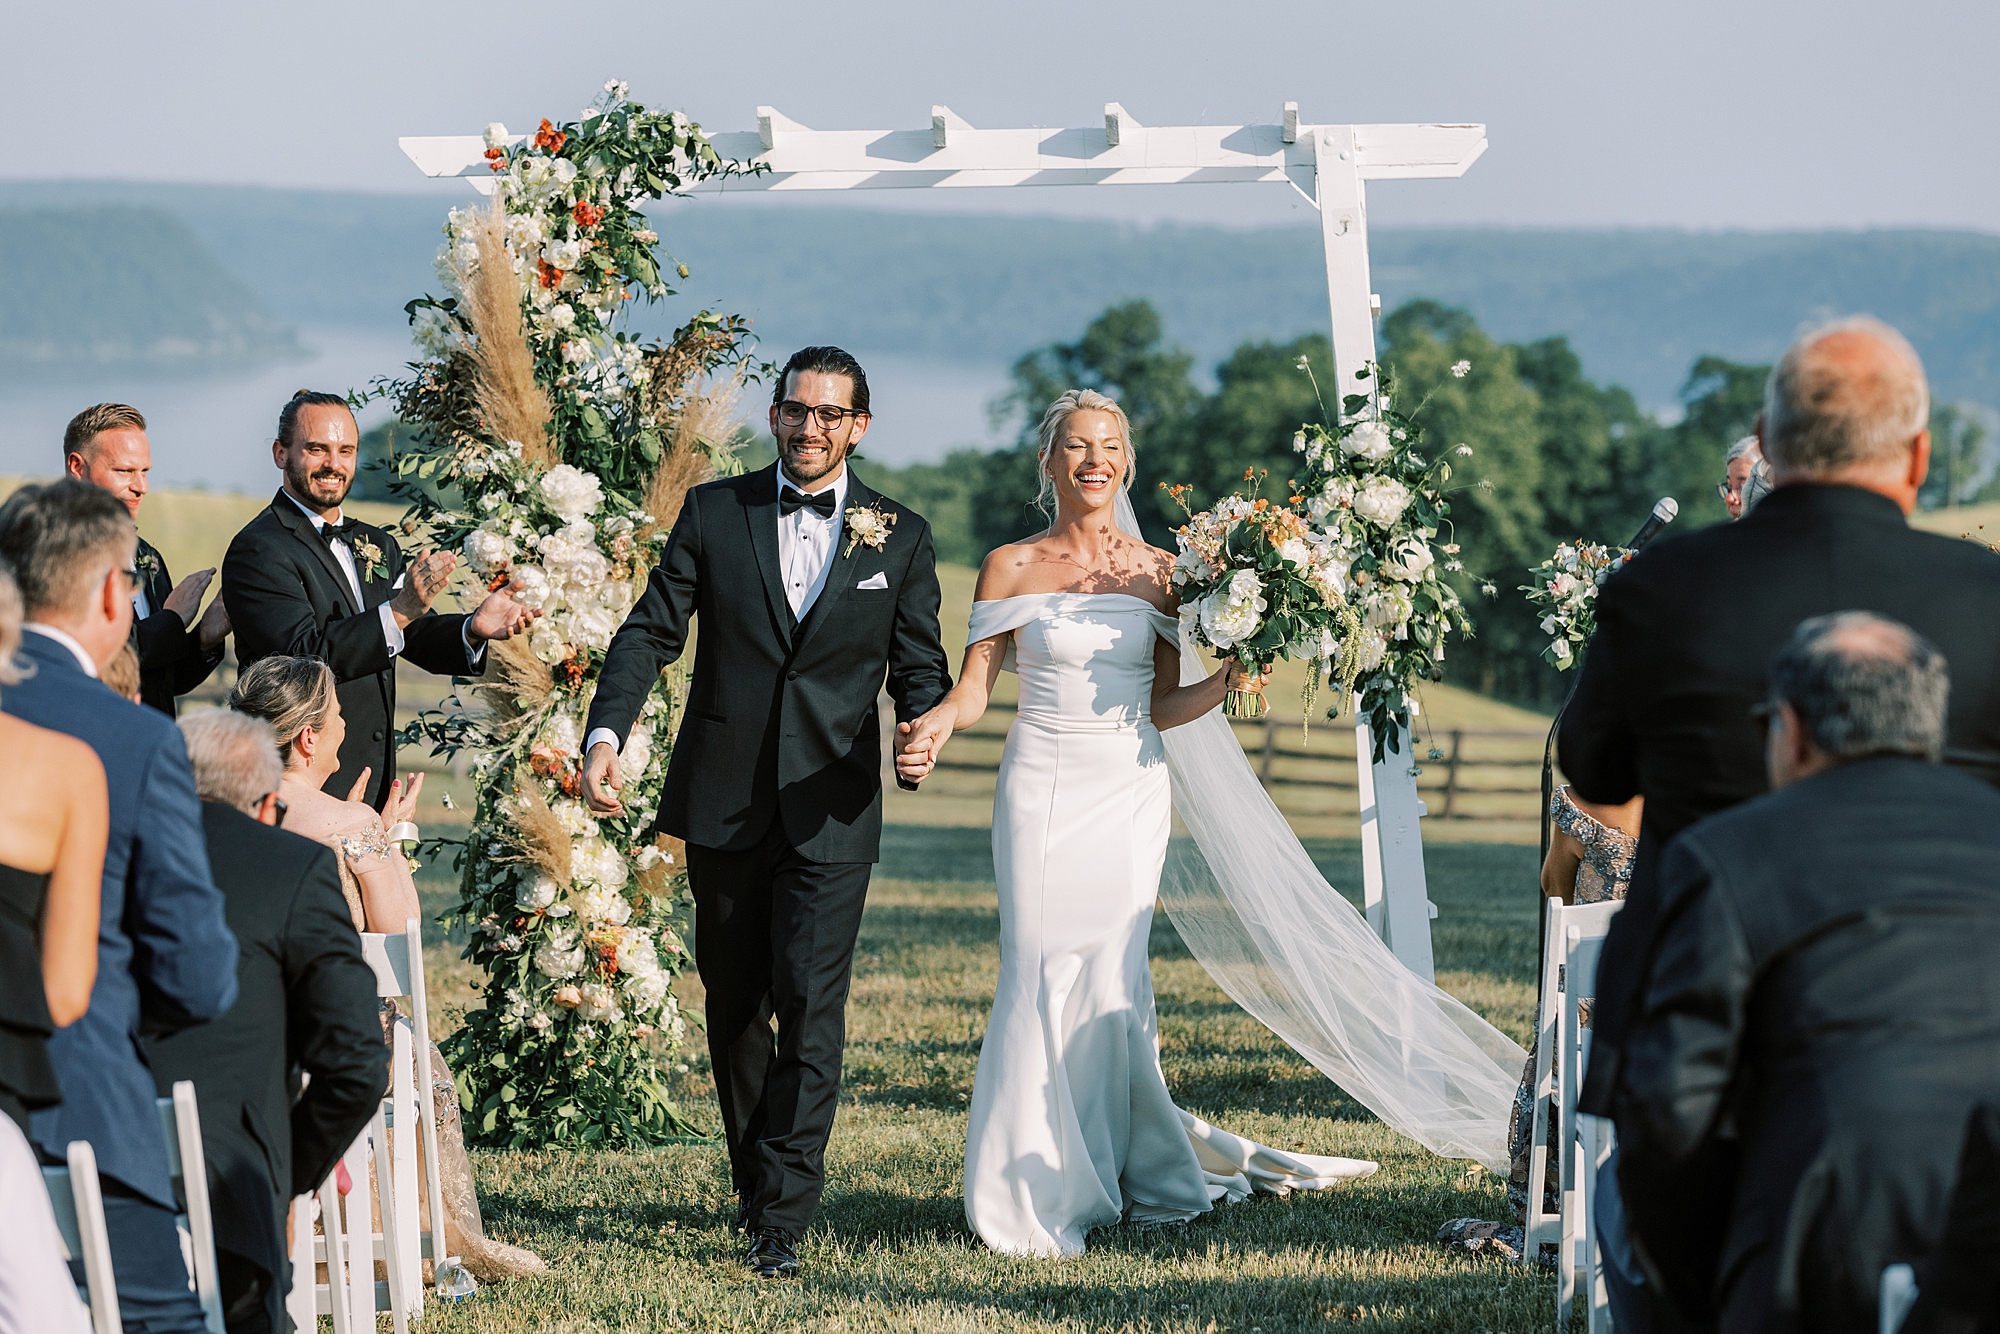 newlyweds walk down aisle in front of mountains during ceremony on lawn at Lauxmont Farms